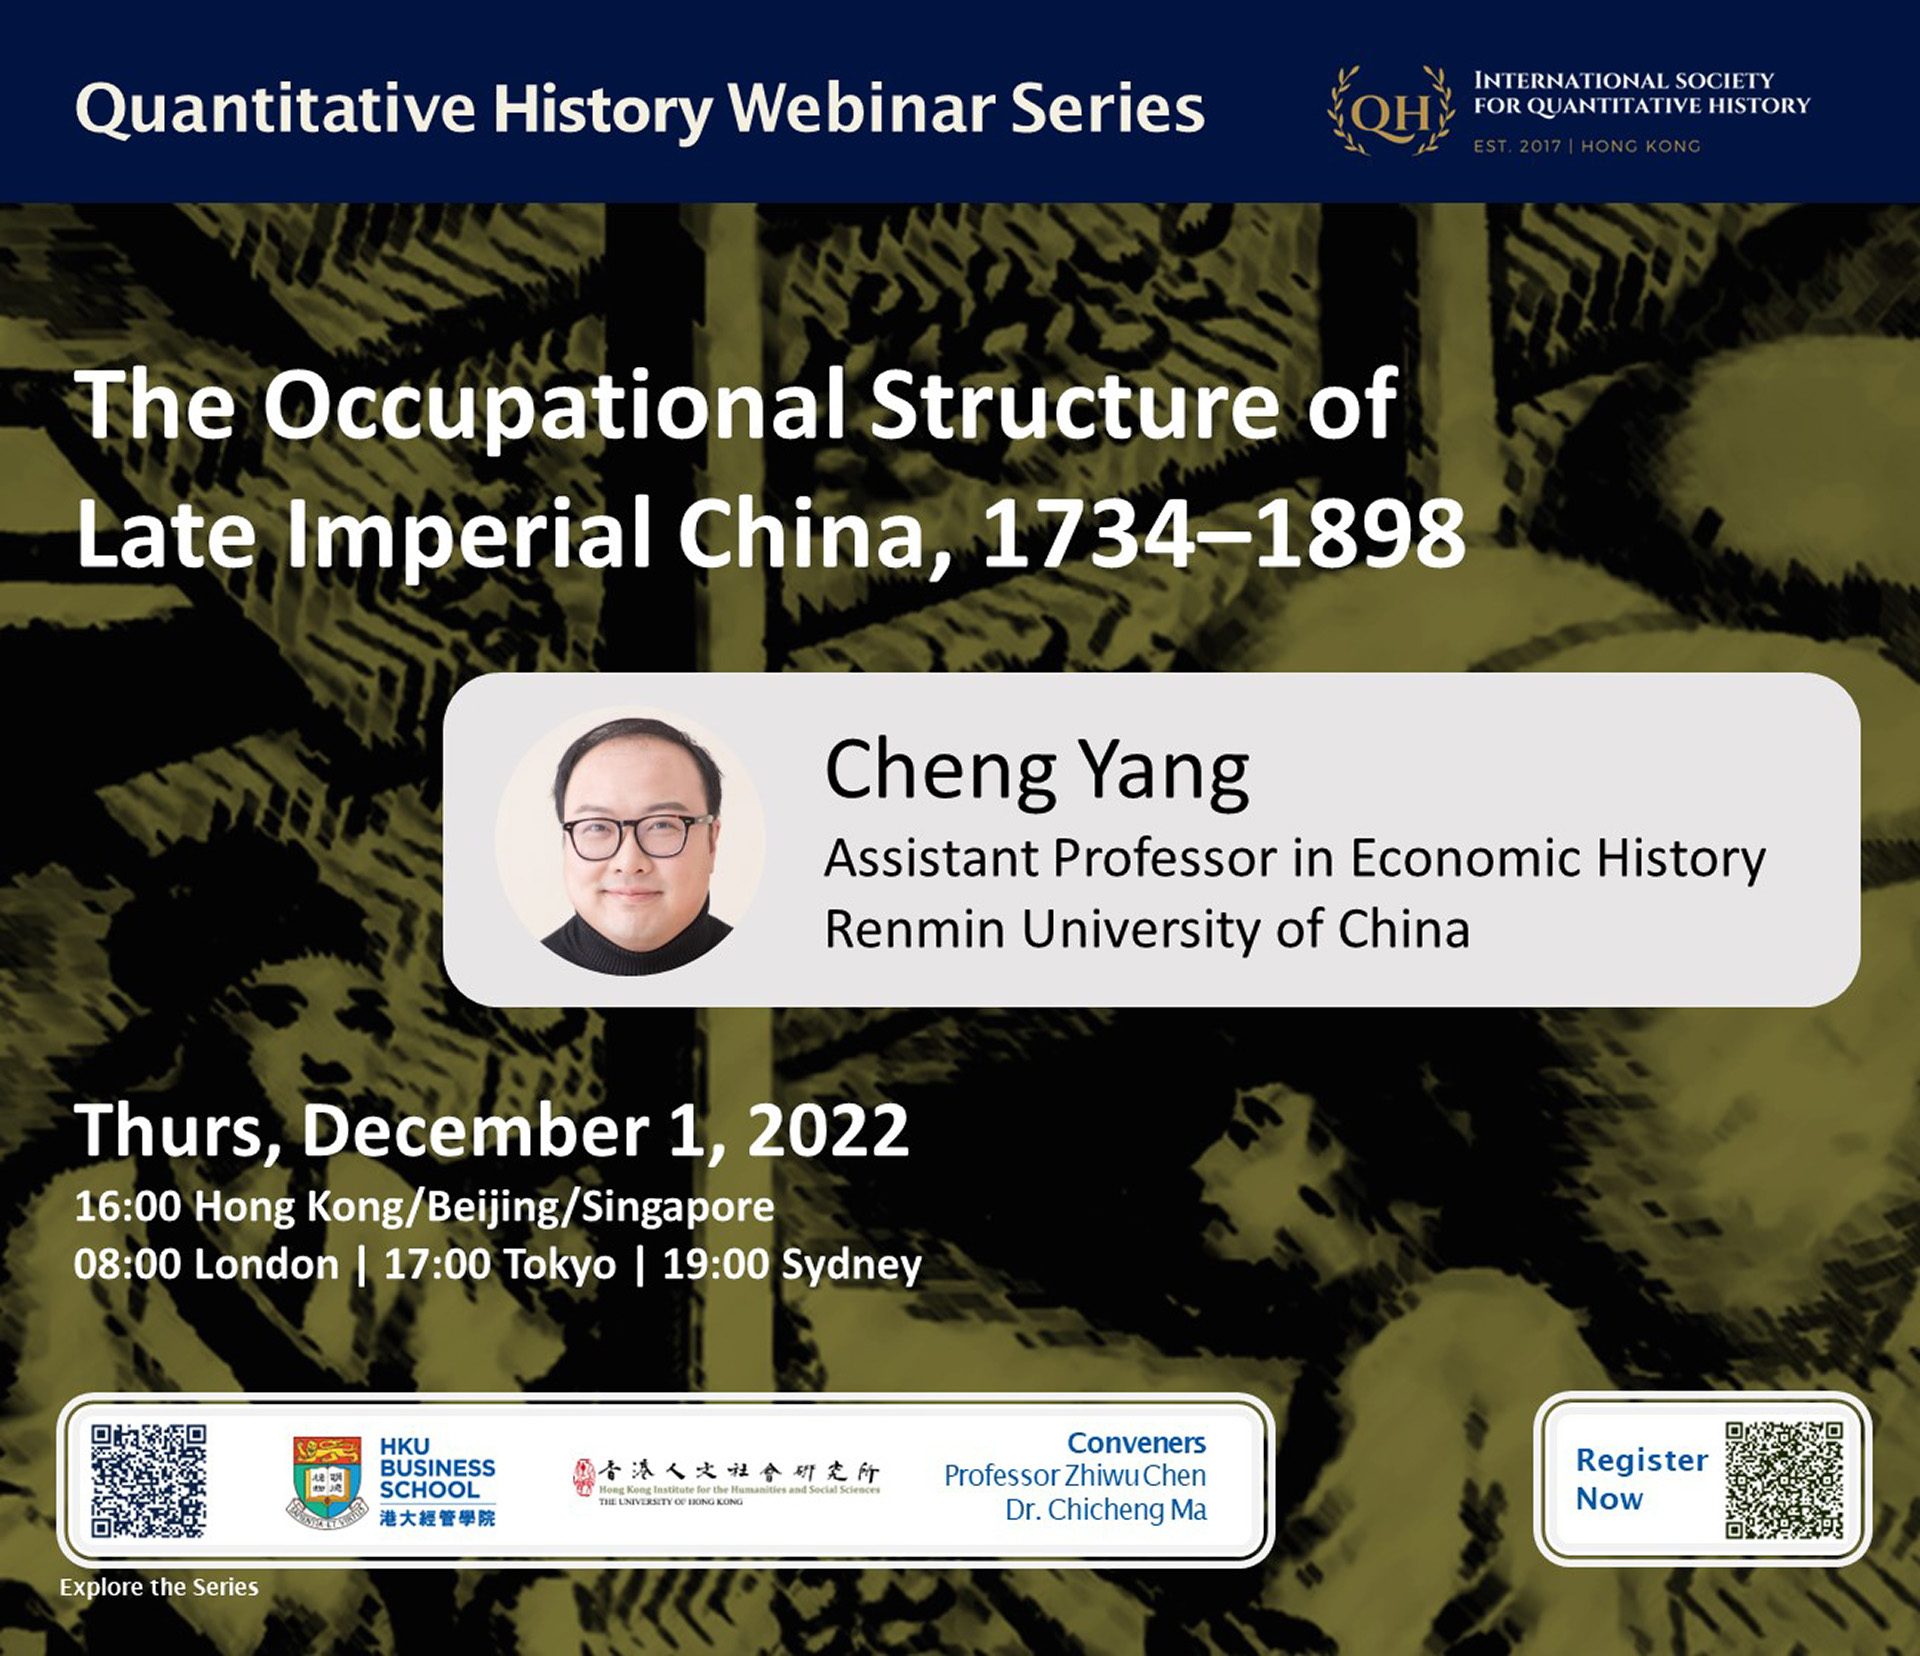 Quantitative History Webinar on “The Occupational Structure of Late Imperial China, 1734 – 1898” by Dr. Cheng Yang (December 1, 2022)